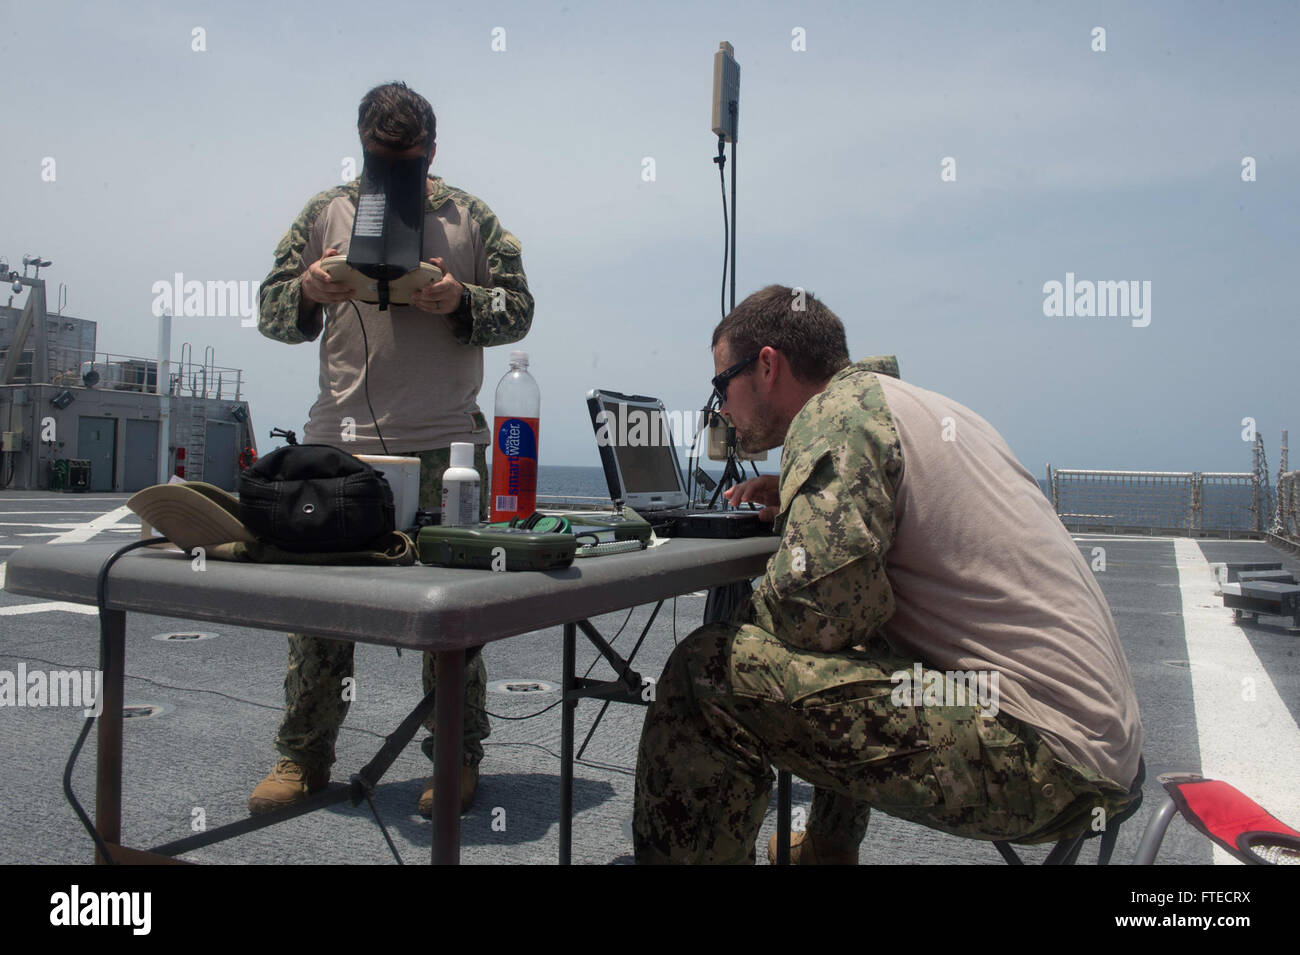 140327-N-ZY039-014  GULF OF GUINEA (March 27, 2014) - Fire Controlman 2nd Class Dustin Gower, and Hull Technician 2nd Class Paul Hobson, both assigned to the PUMA unmanned aerial vehicle (UAV) detachment aboard joint, high-speed vessel USNS Spearhead (JHSV 1) operate a UAV during flight operations as part of a U.S.-Ghana combined maritime law enforcement operation under the African Maritime Law Enforcement Partnership (AMLEP) program. AMLEP, the operational phase of Africa Partnership Station (APS), brings together U.S. Navy, U.S. Coastguard, and respective Africa partner maritime forces to ac Stock Photo